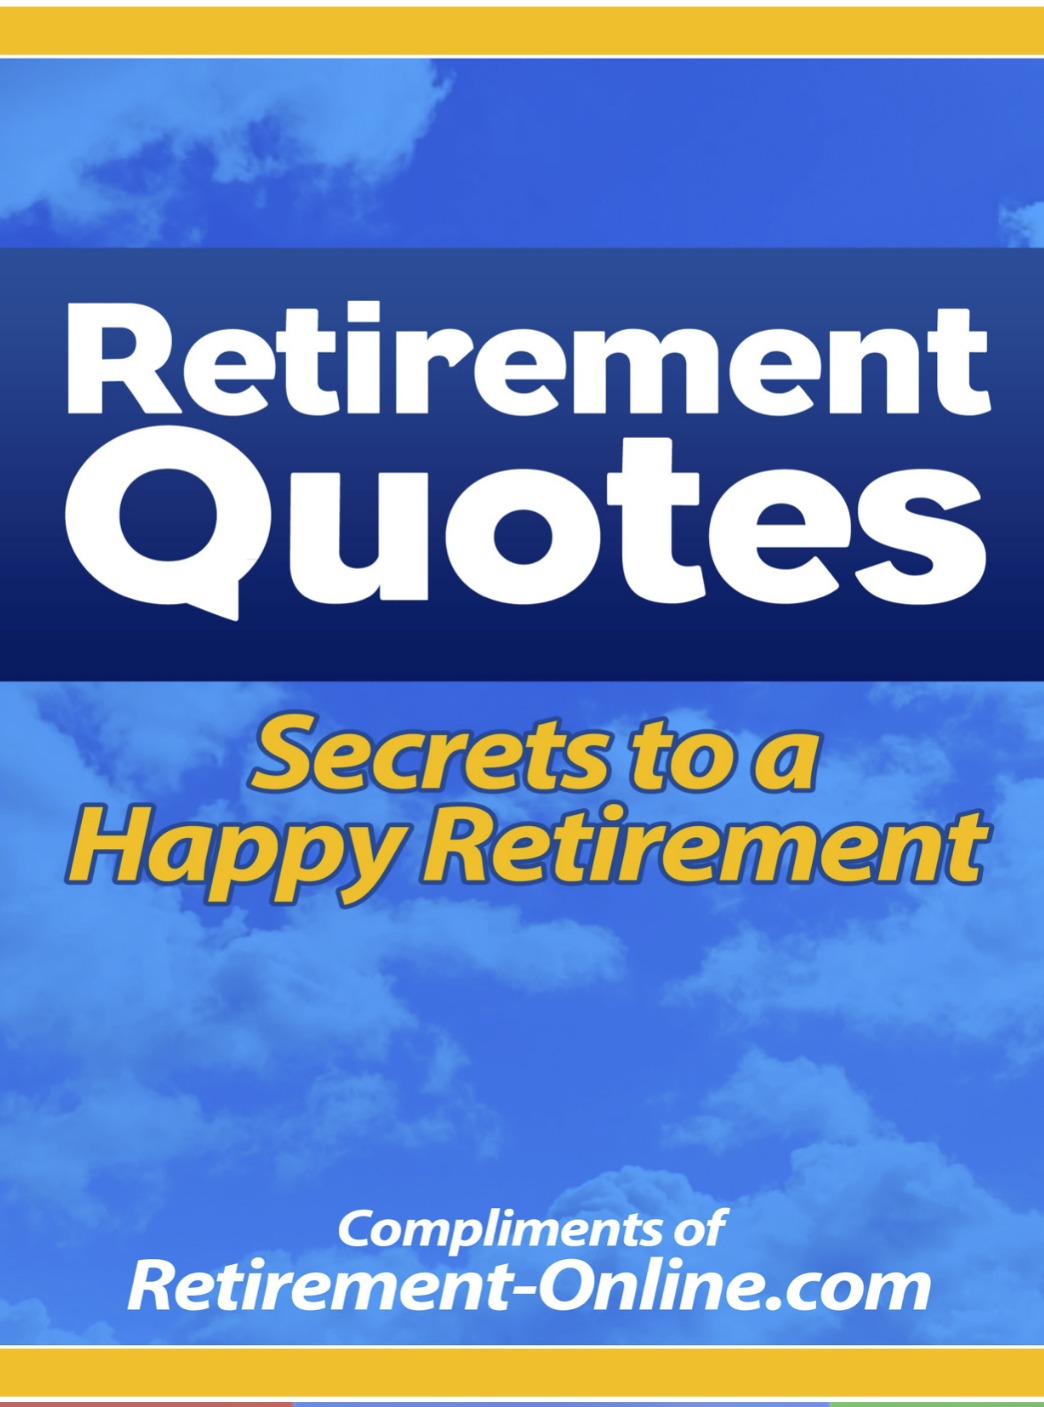 early retirement extreme ebook download